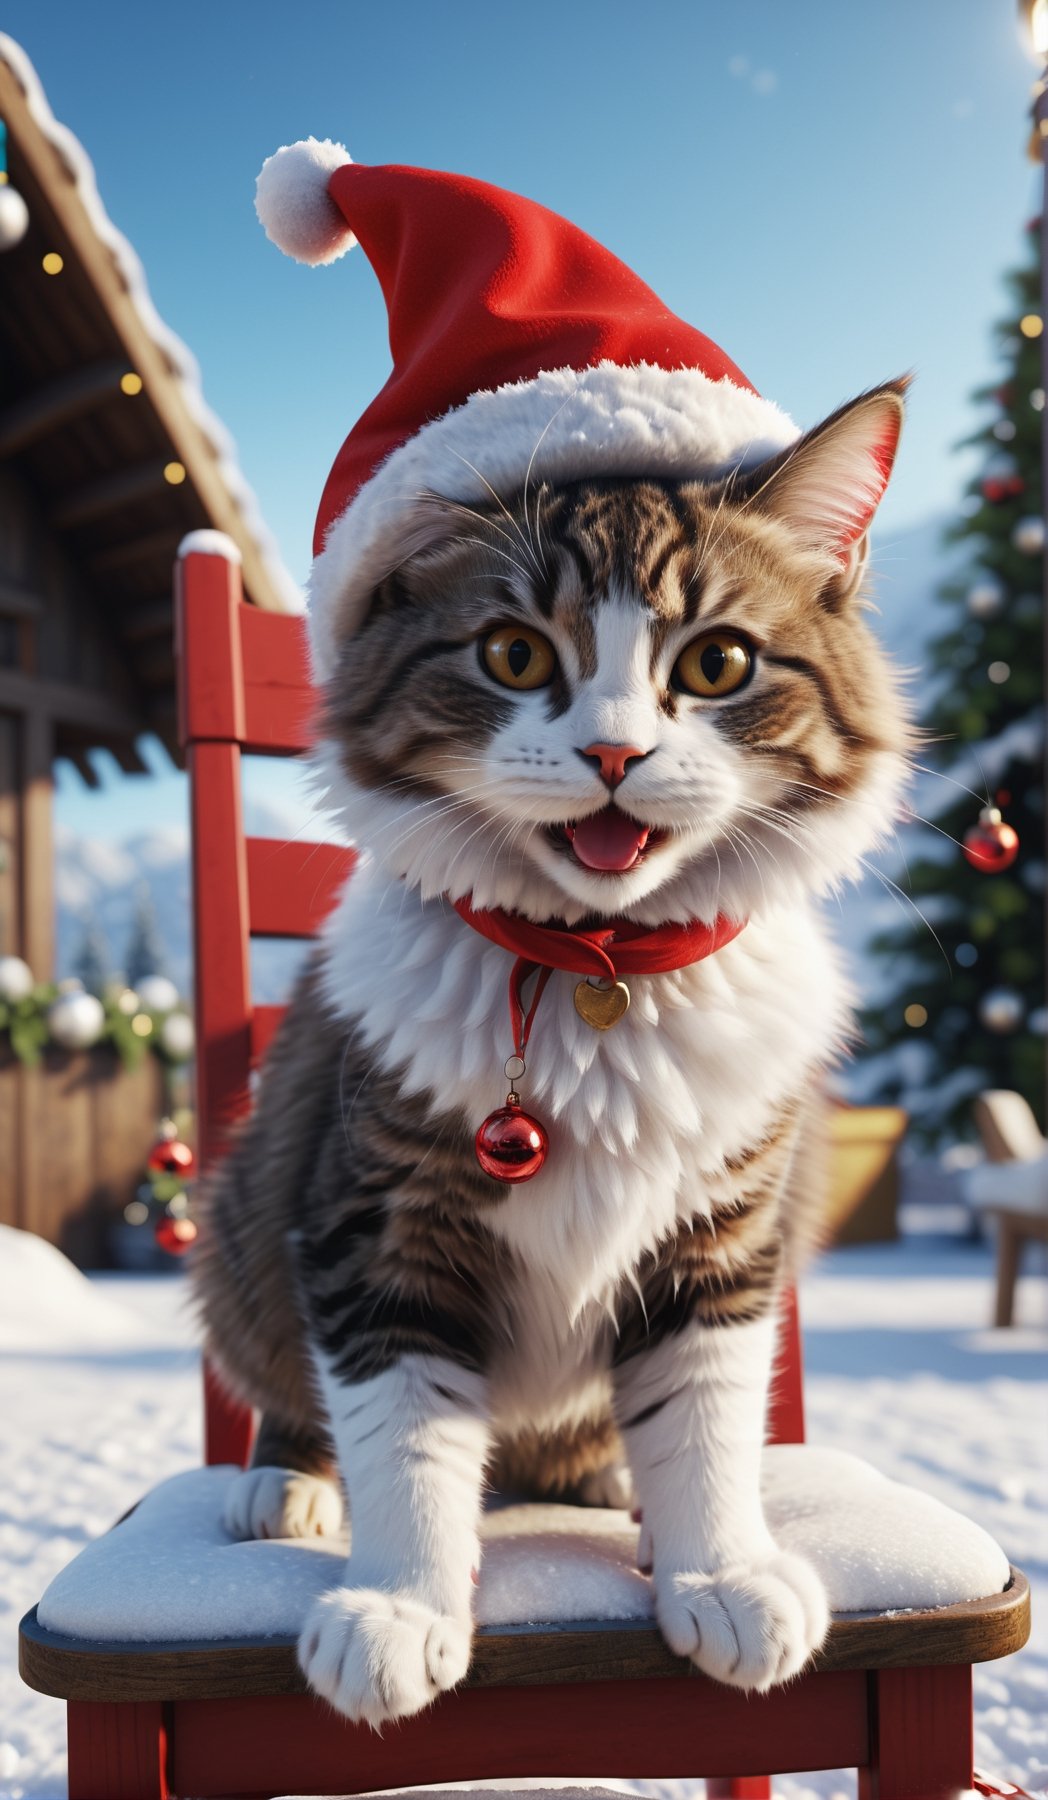 8K, Ultra-HD,realistic,photolism, Natural Lighting, sunny day, Cinematic Lighting,detailed,CG,unity,extremely detailed CG,
solo,cute cat,A fluffy cat,jump to chair,Wearing red Christmas hat,snow,outdoor,